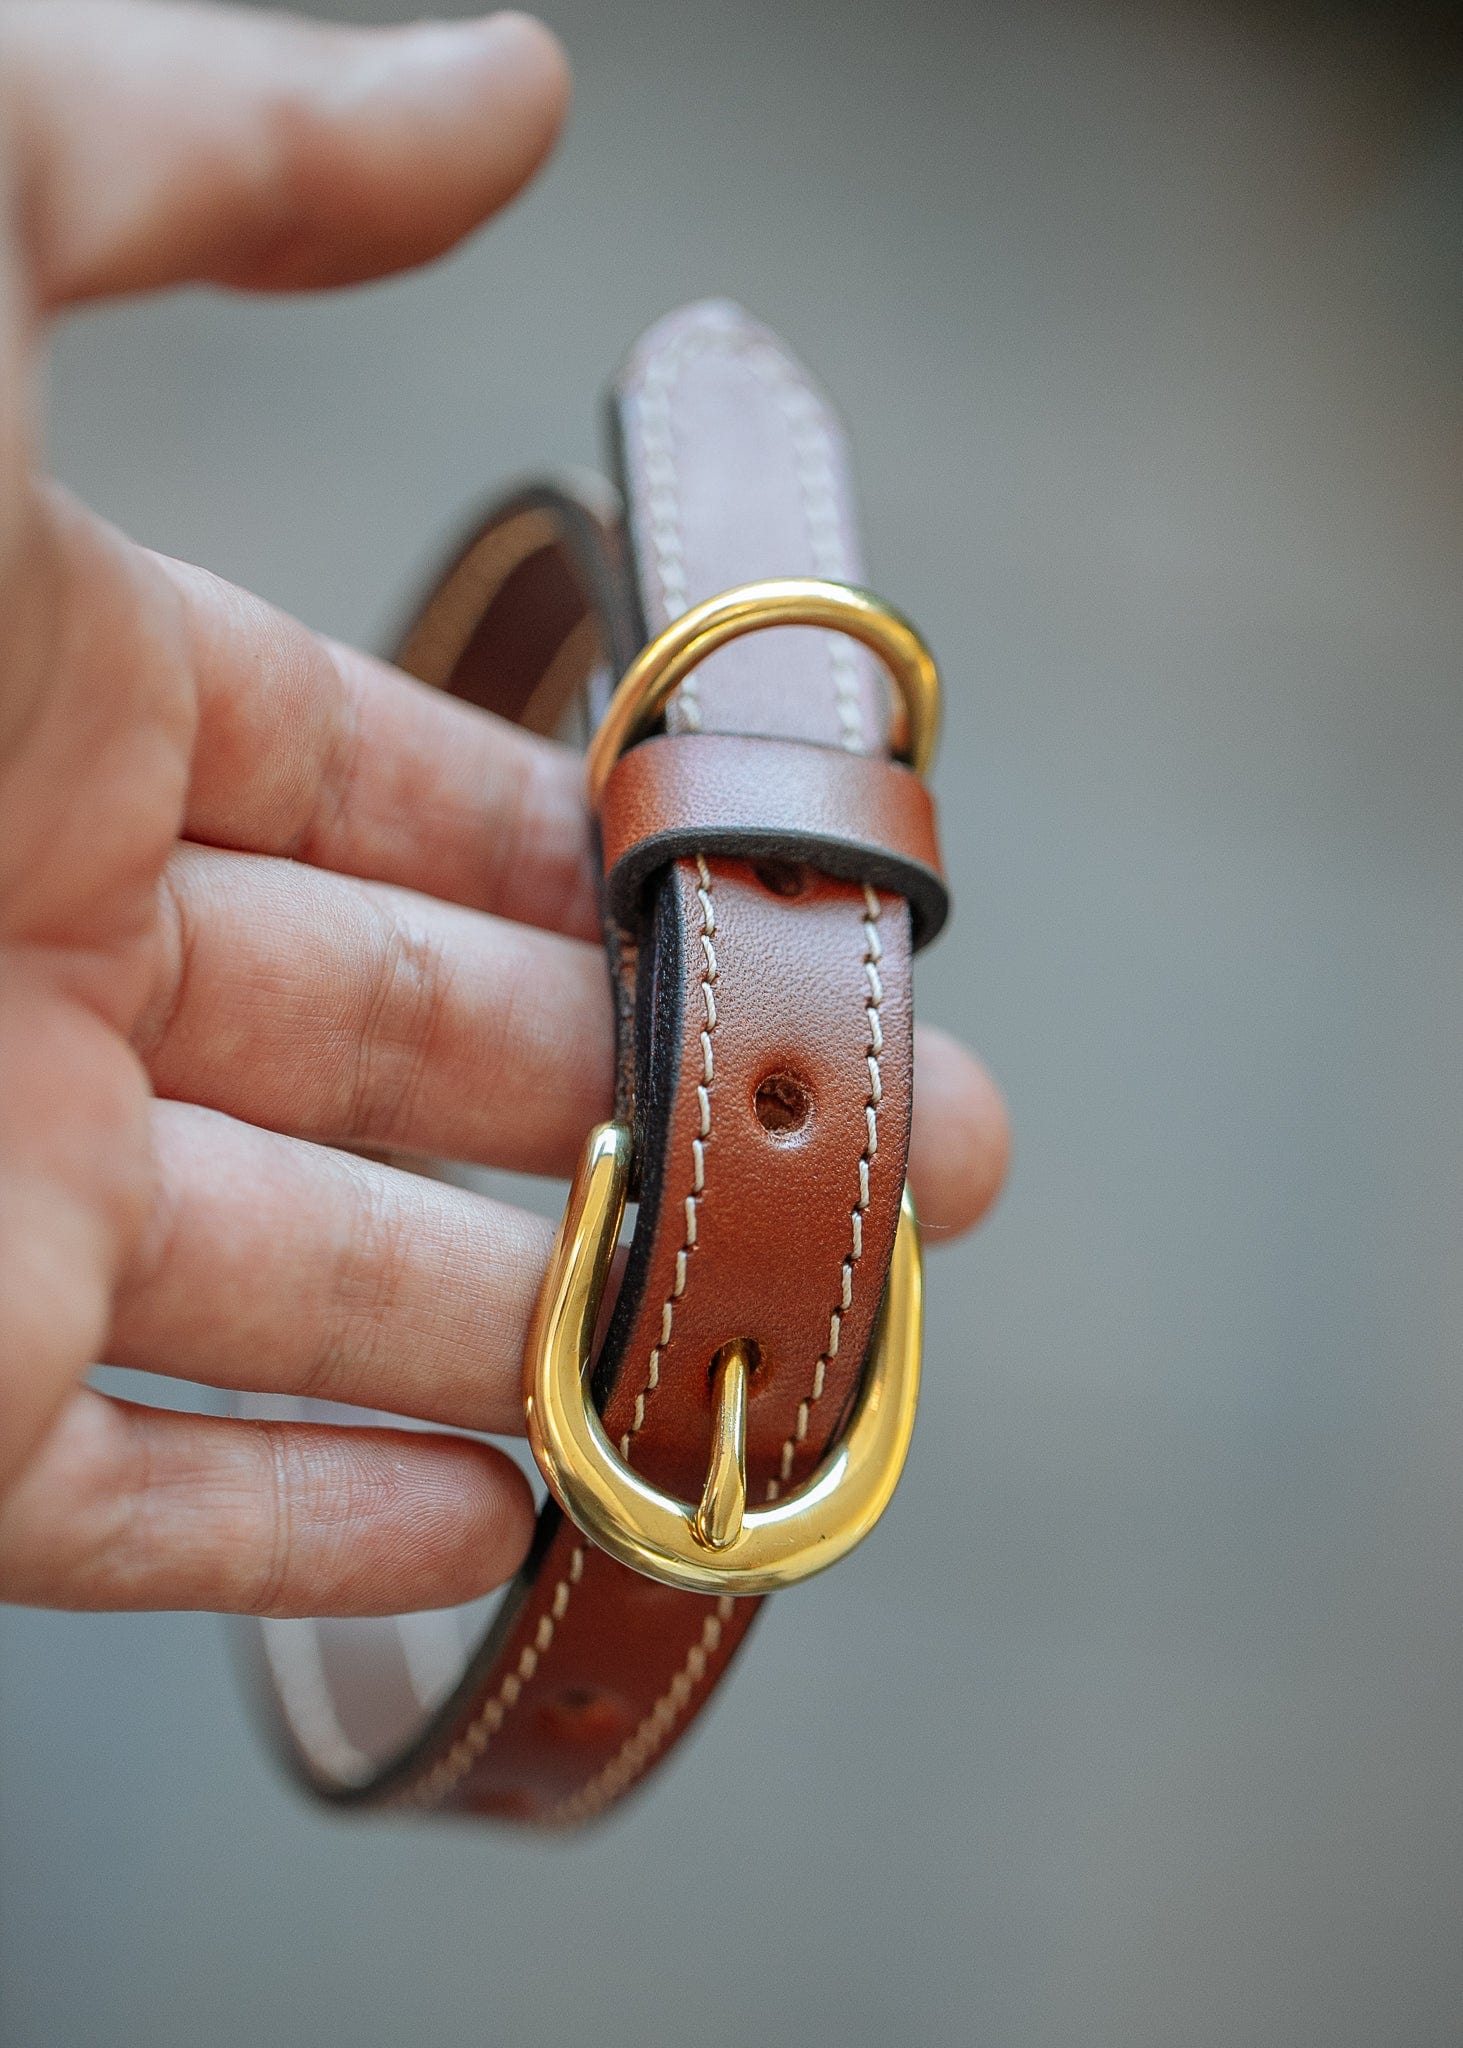 The Real McCaul Leathergoods Pet Collars & Harnesses Rancher Dog Collar - 20mm - Tan Australian Made Australian Owned Australian Made Dog Collar - Solid Leather with Brass